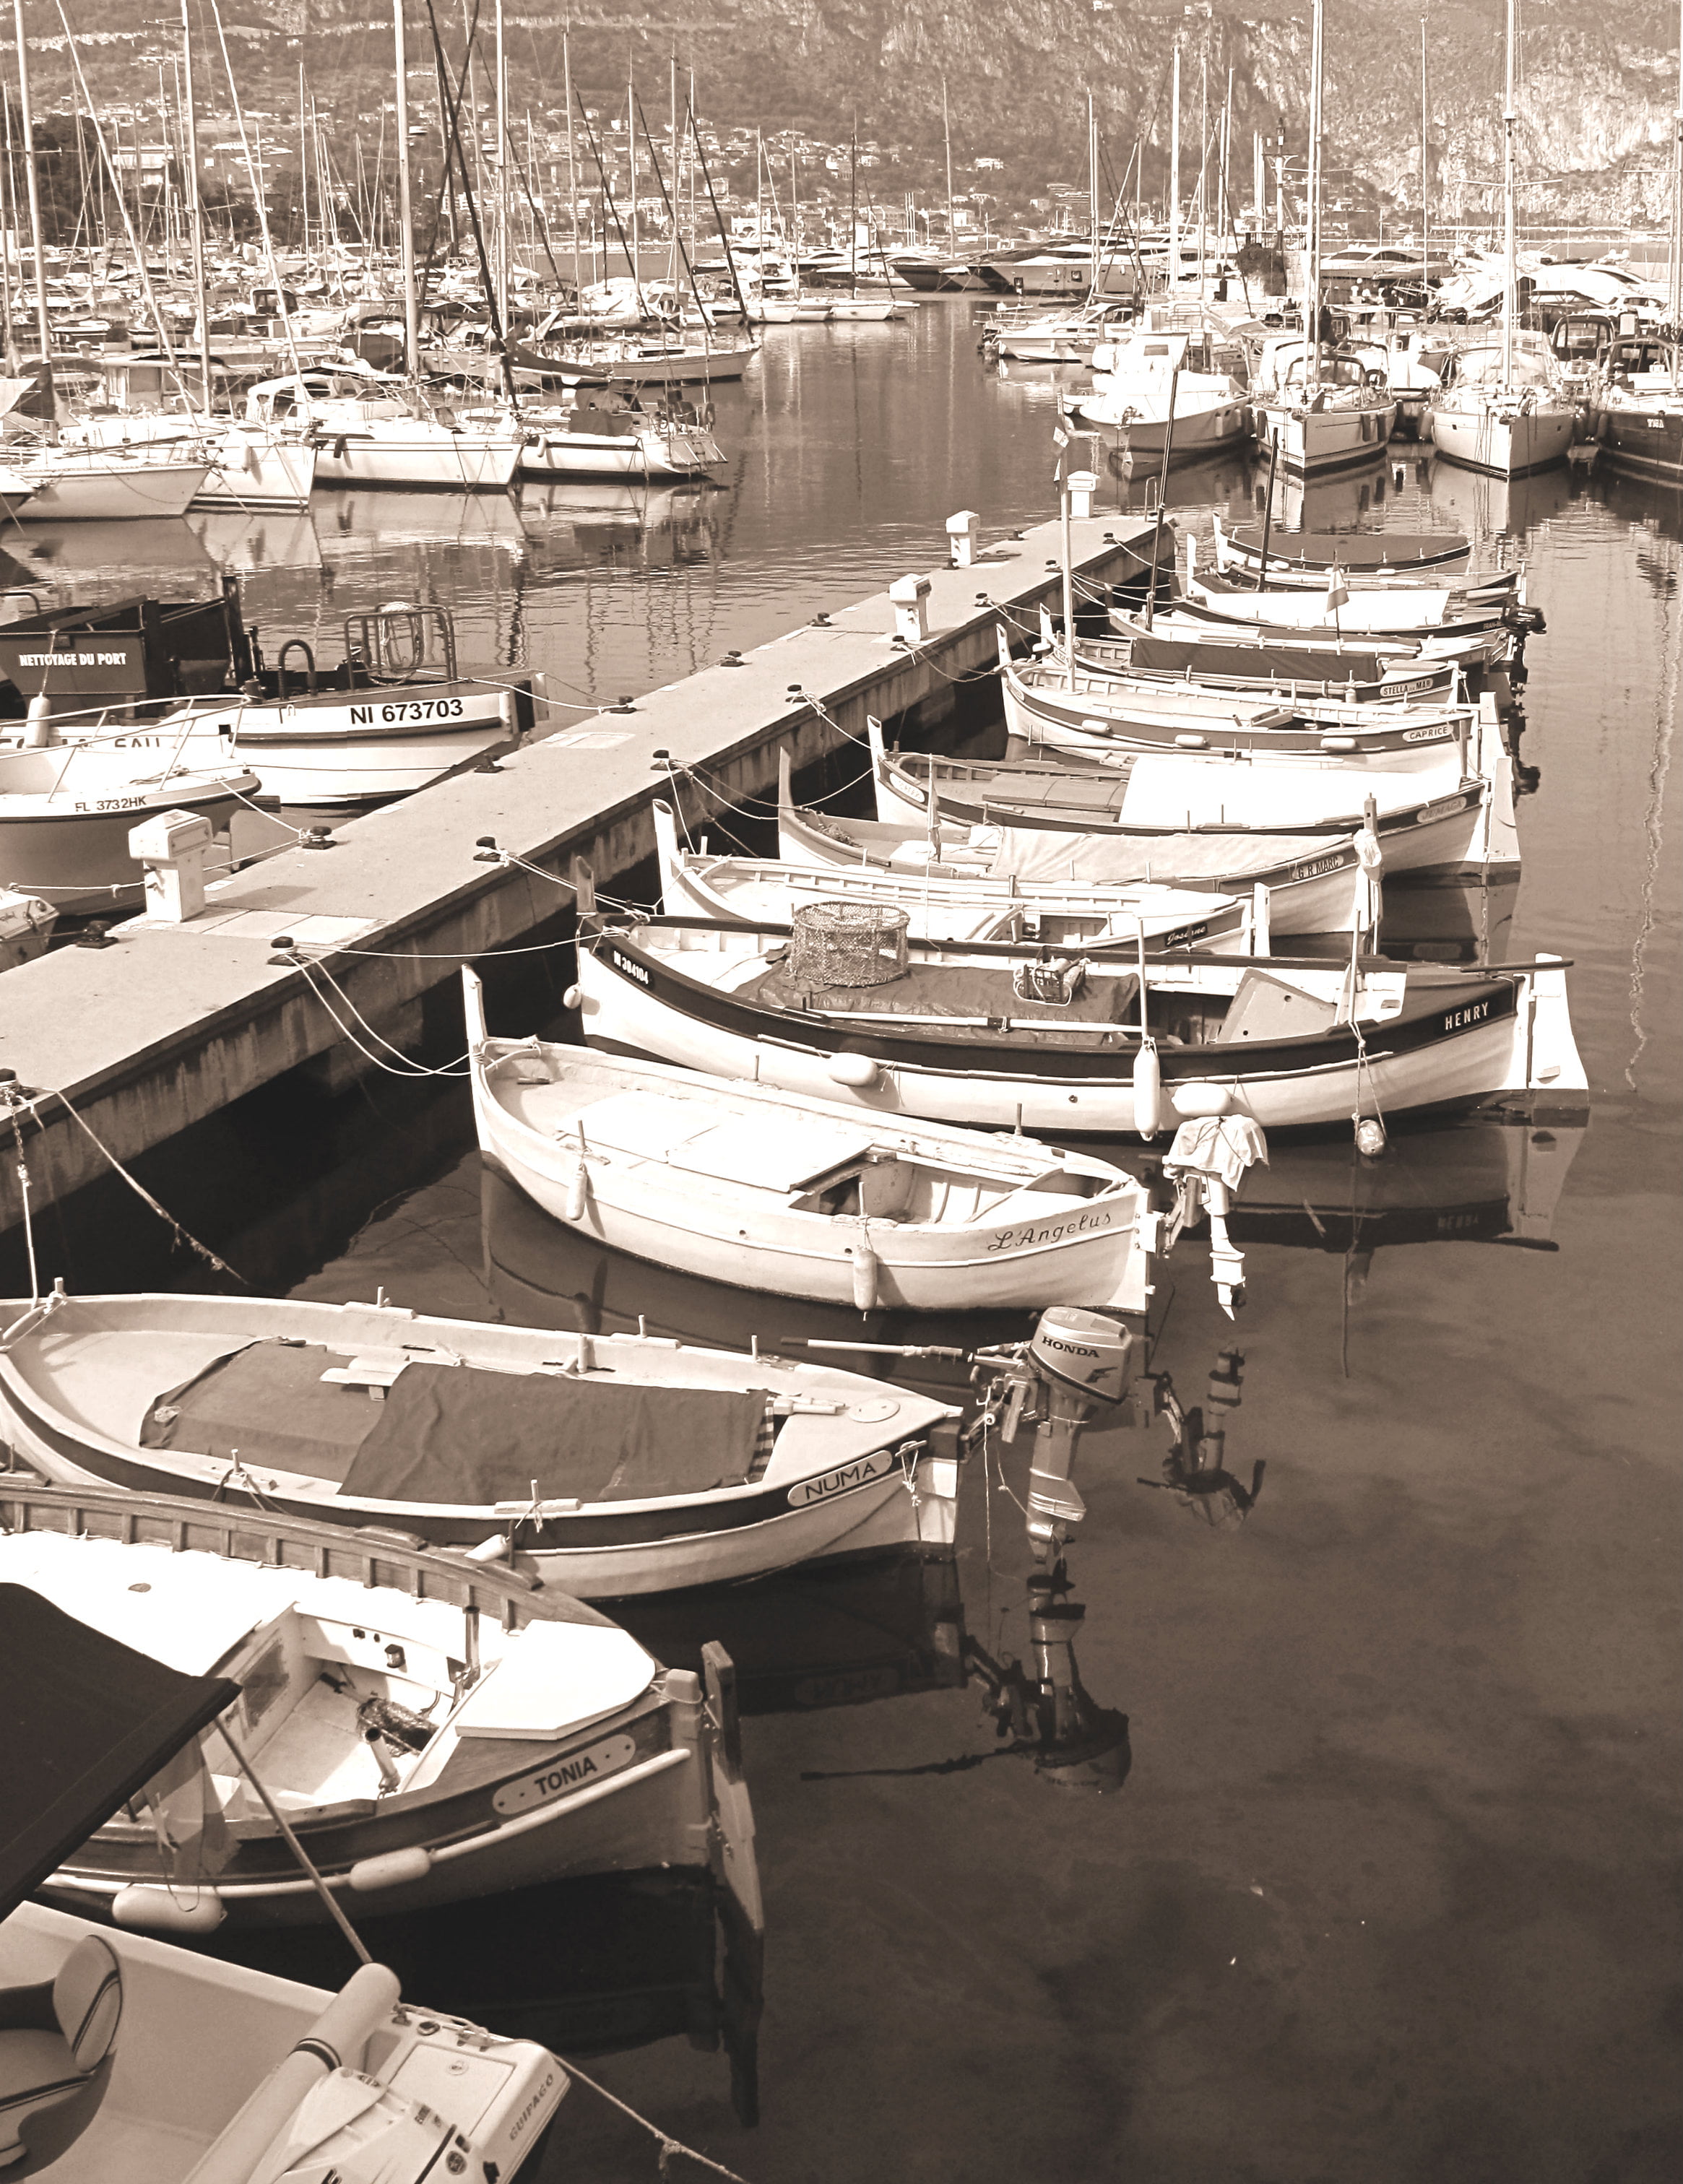 An old photo of a harbor in the French Riviera